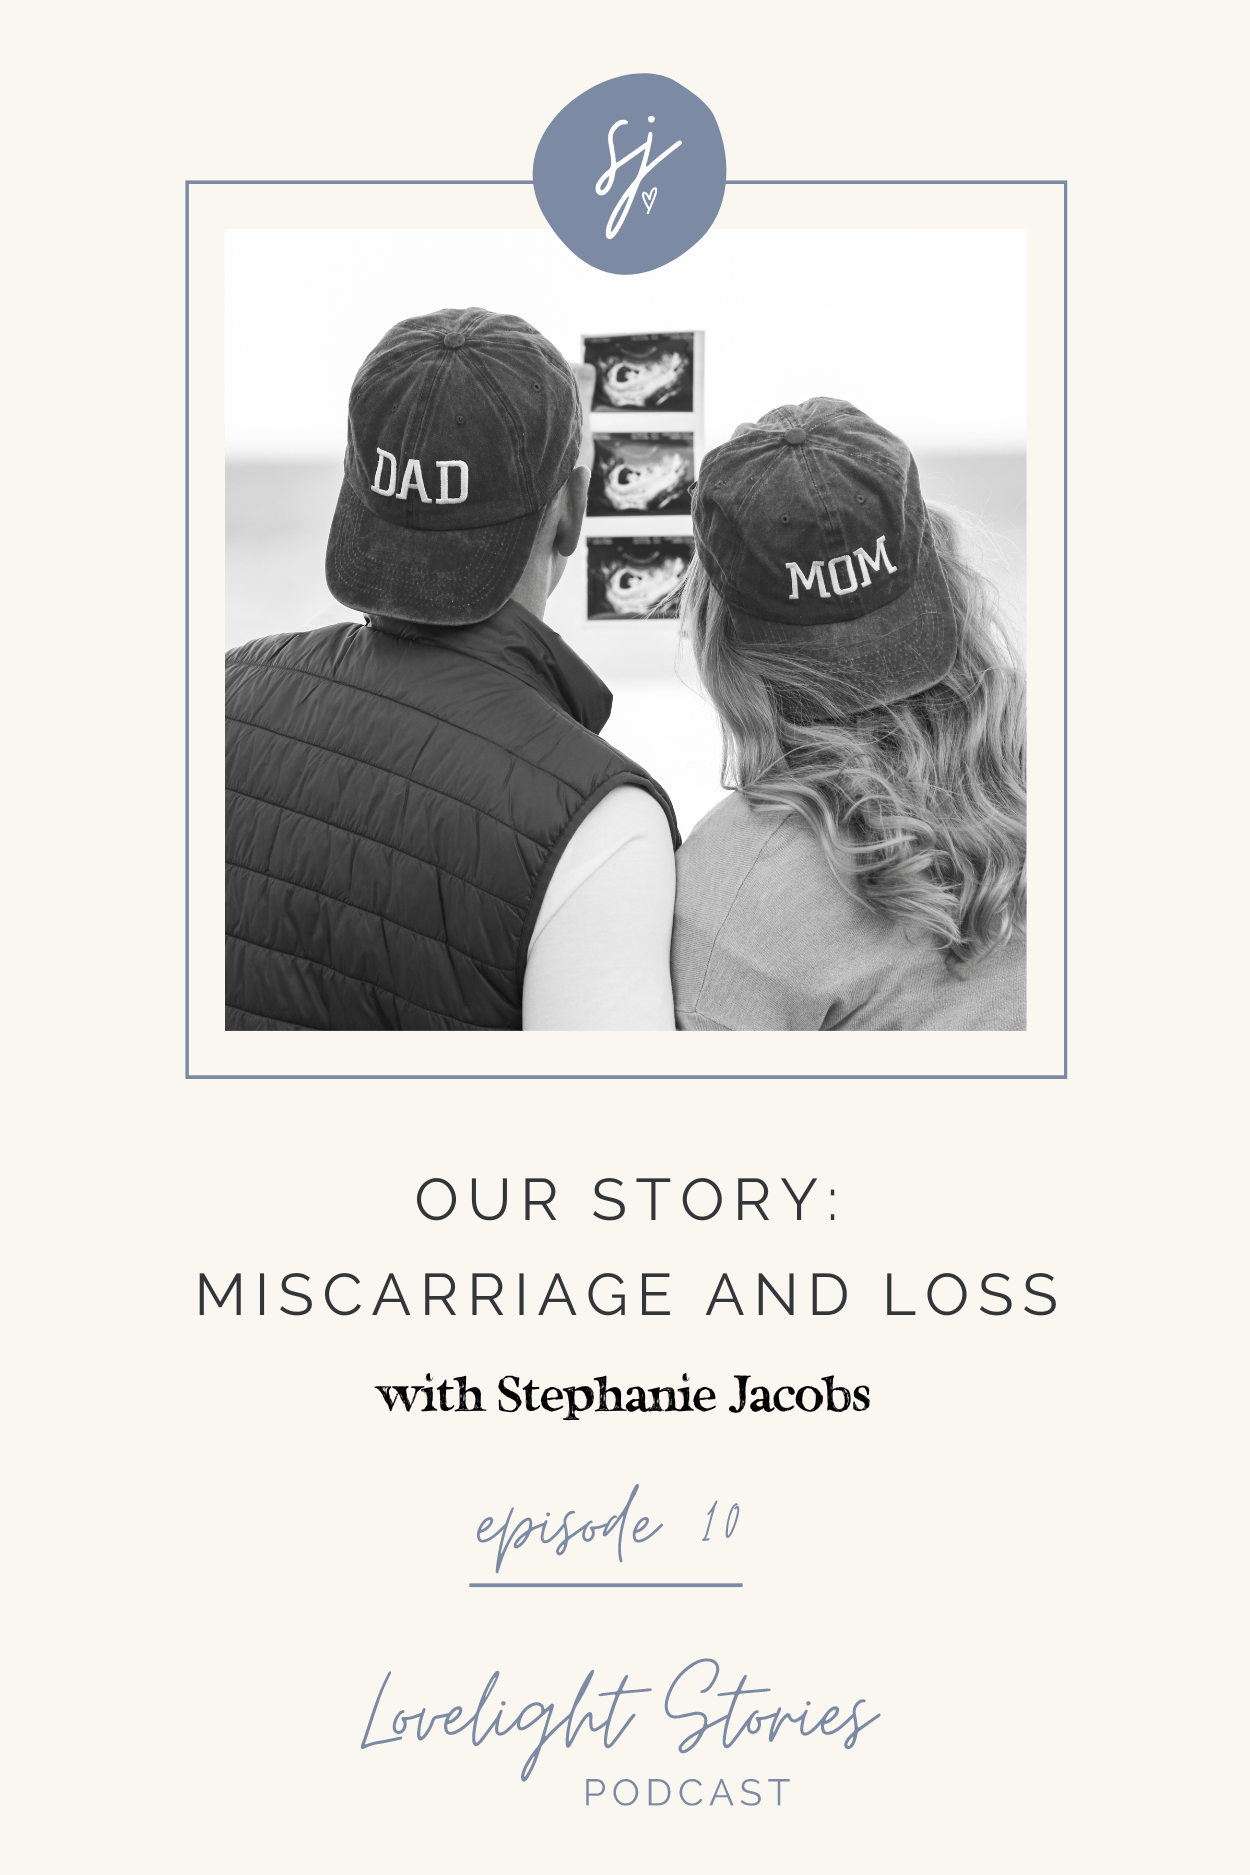 Our Story: Miscarriage and Loss